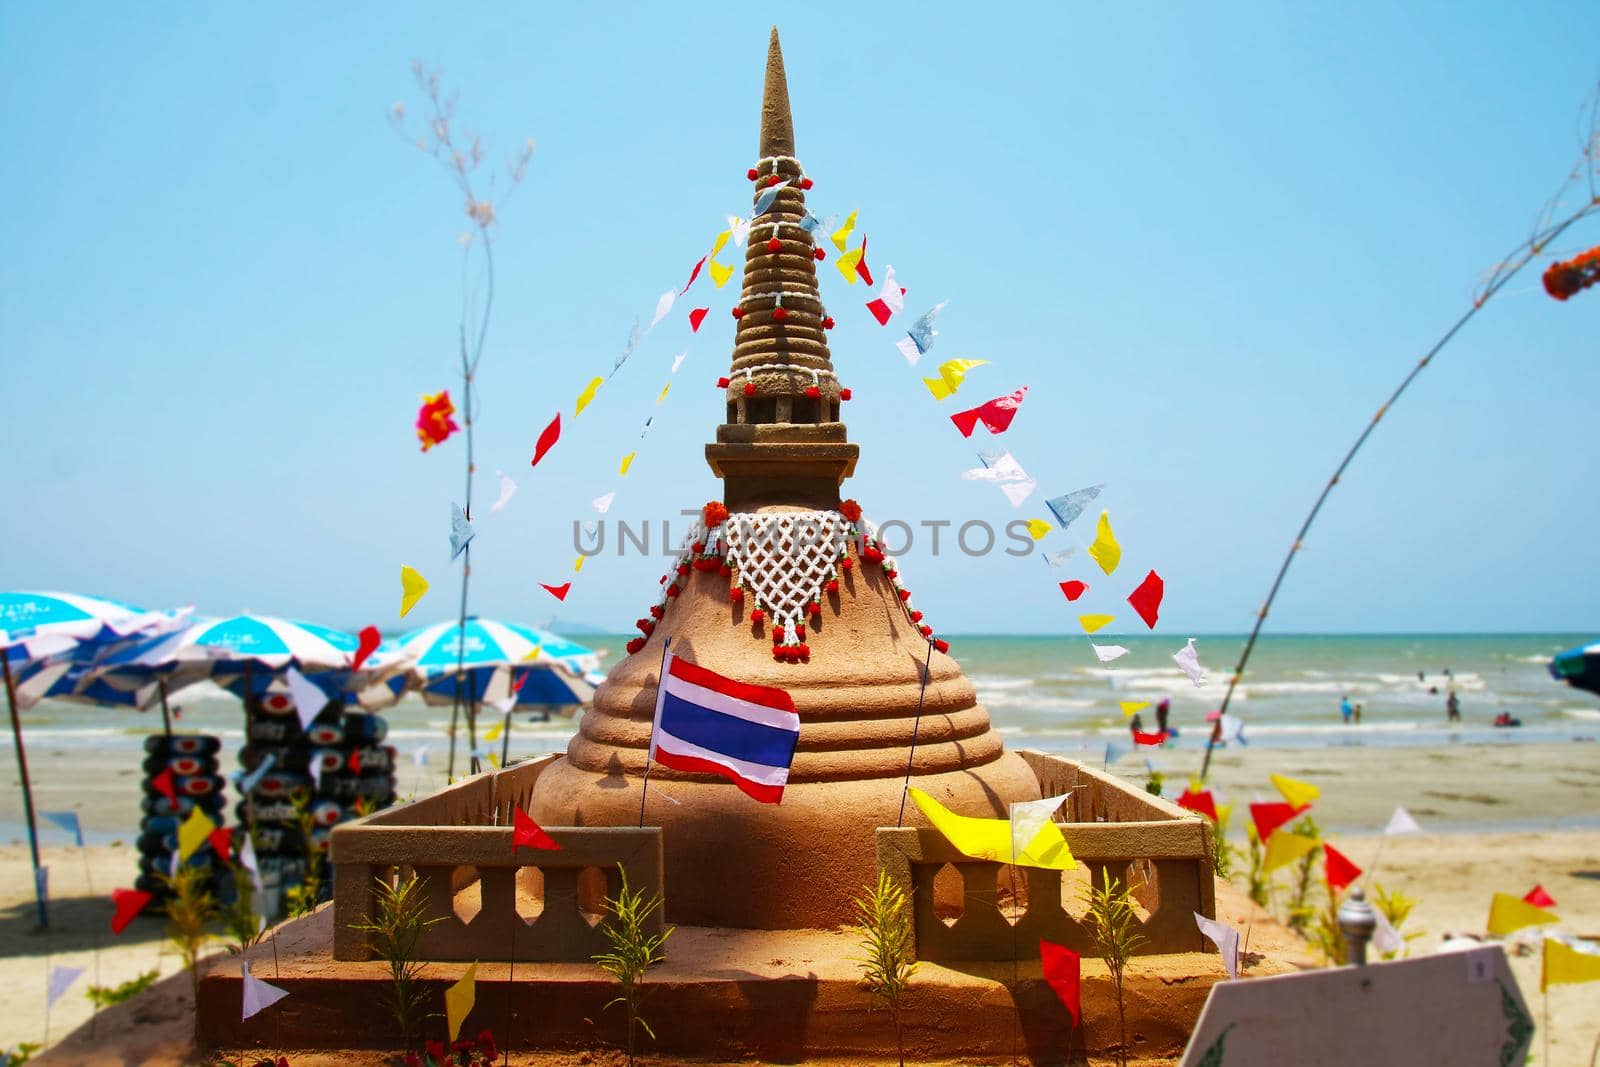 small sand pagoda was carefully built, and beautifully decorated in Songkran festival by Darkfox